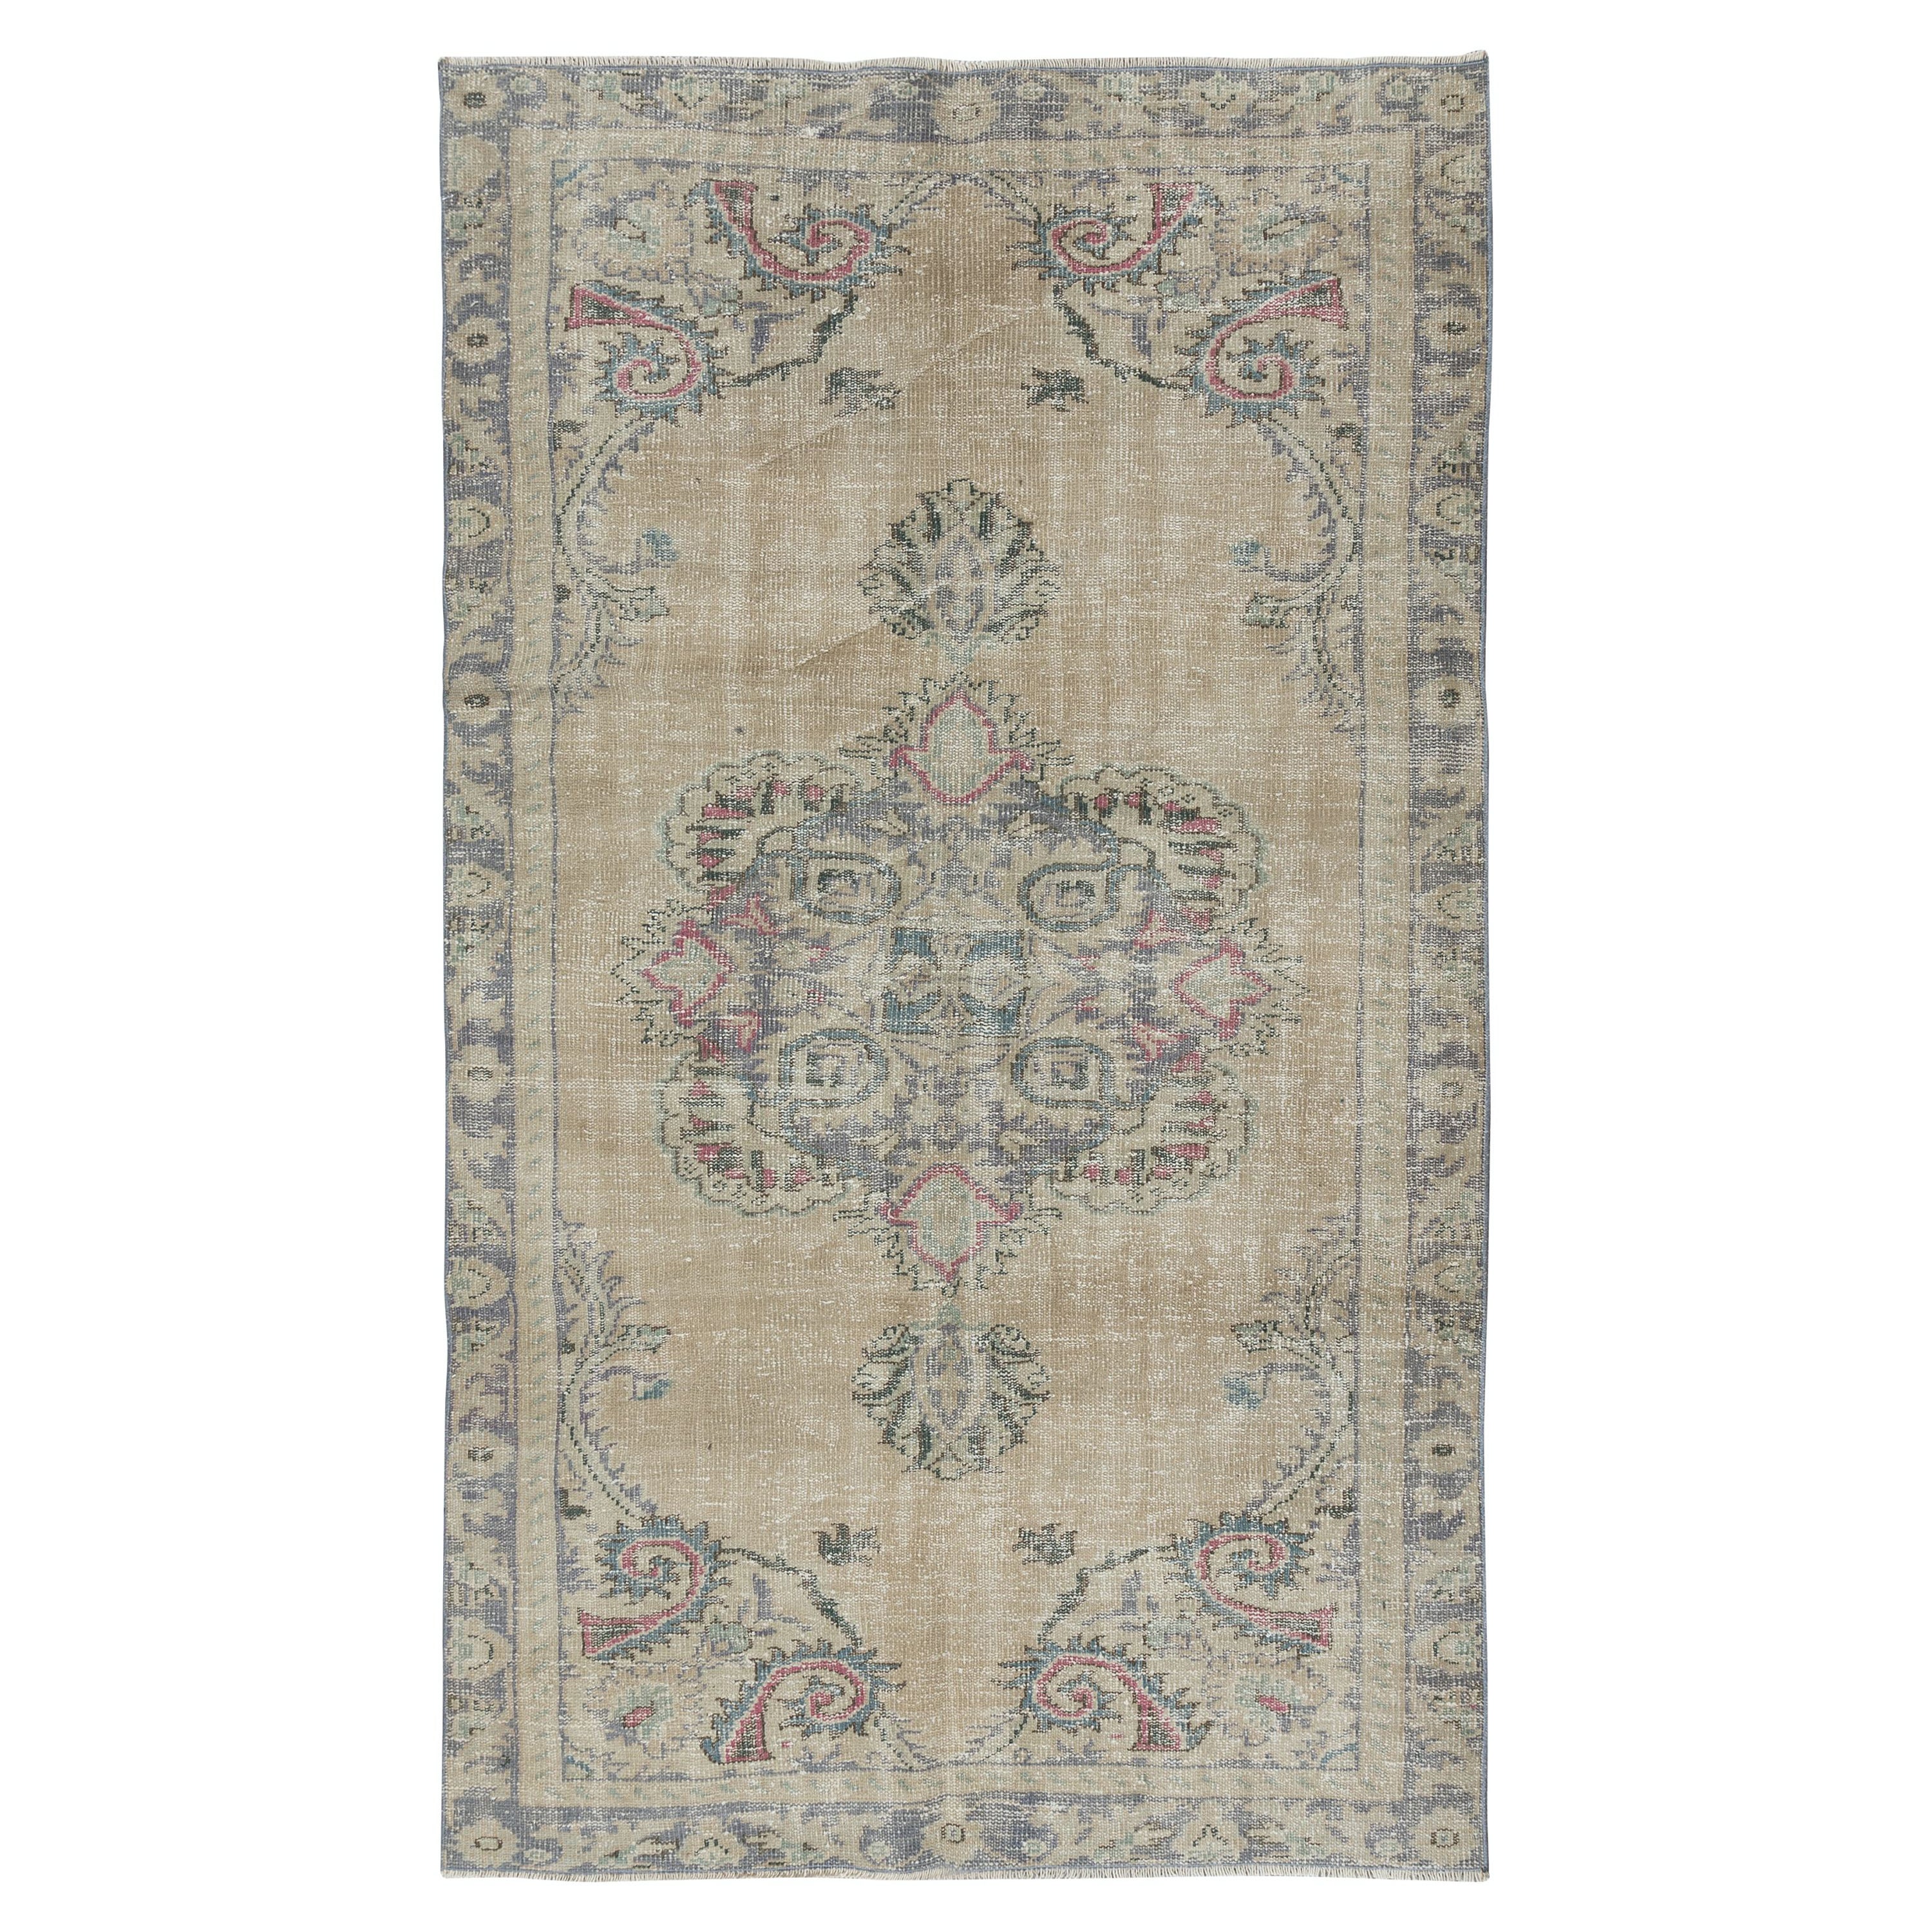 4.8x7.8 Ft Vintage Sun Faded Rug, Hand Knotted Turkish Carpet in Beige & Gray For Sale